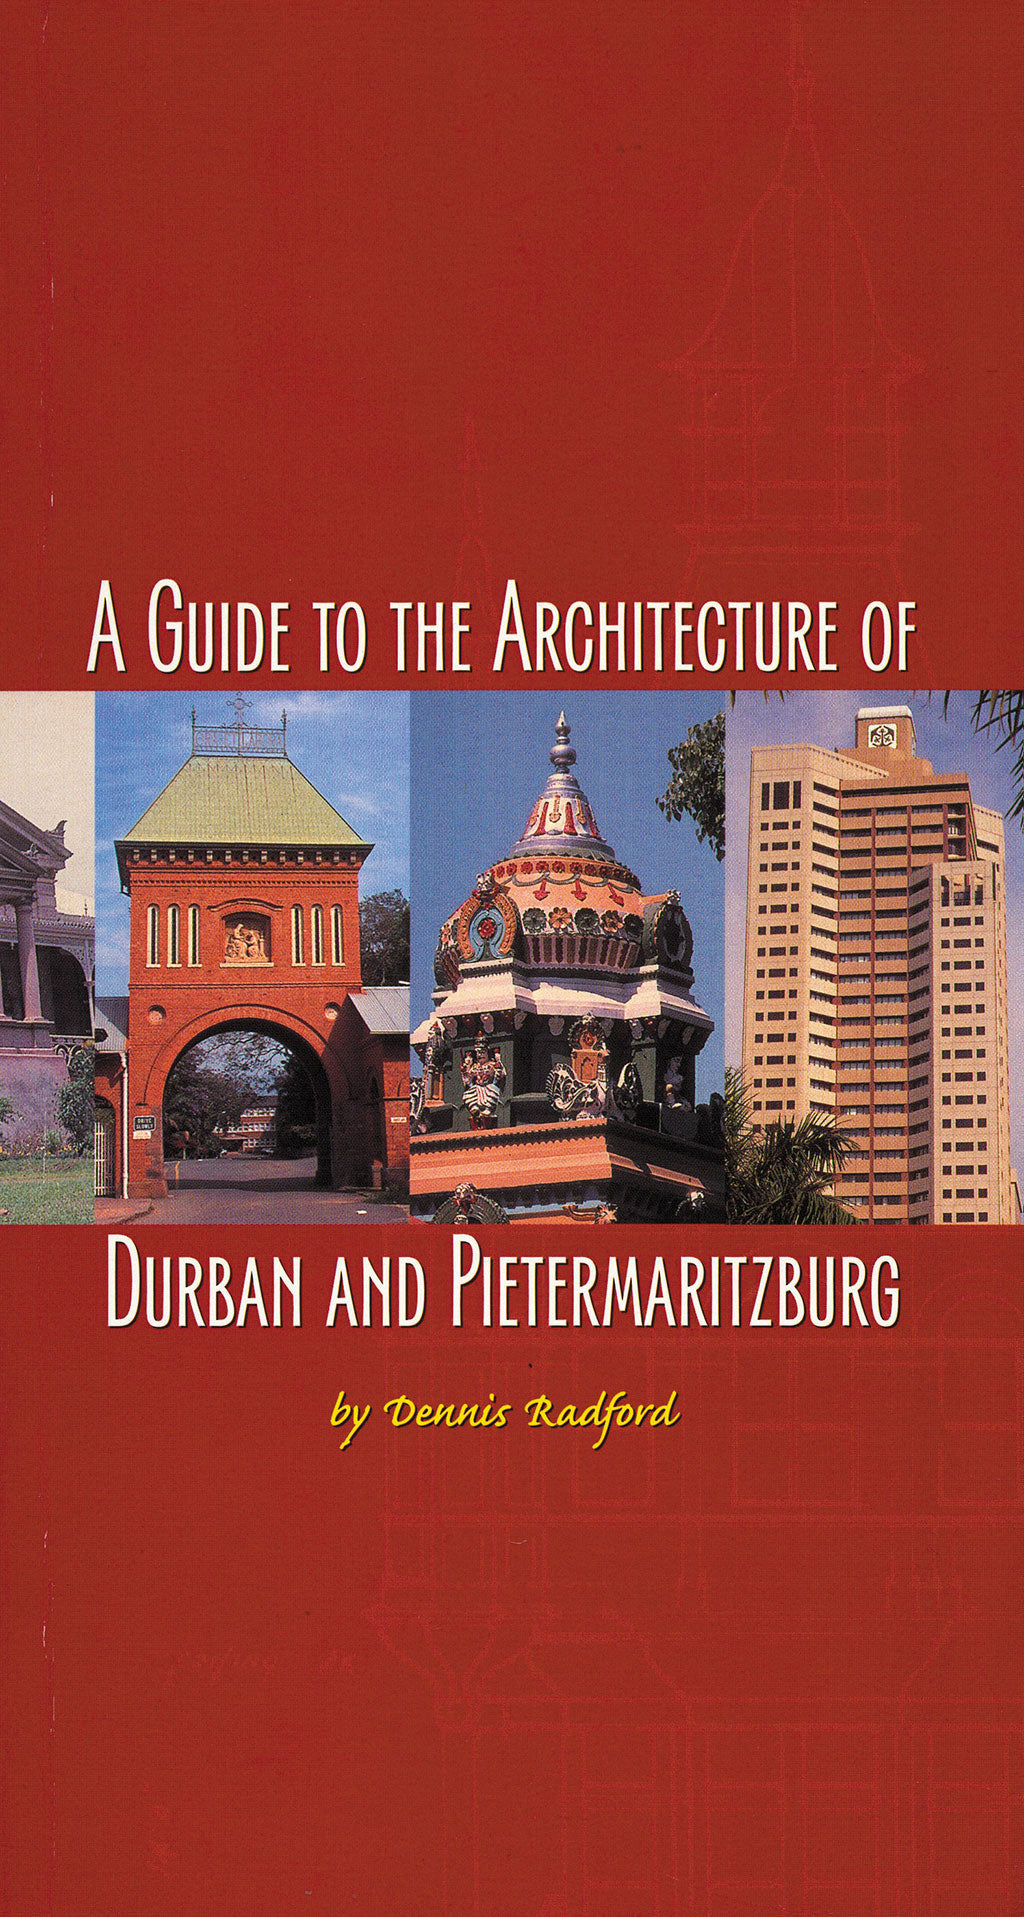 A GUIDE TO THE ARCHITECTURE OF DURBAN AND PIETERMARITZBURG